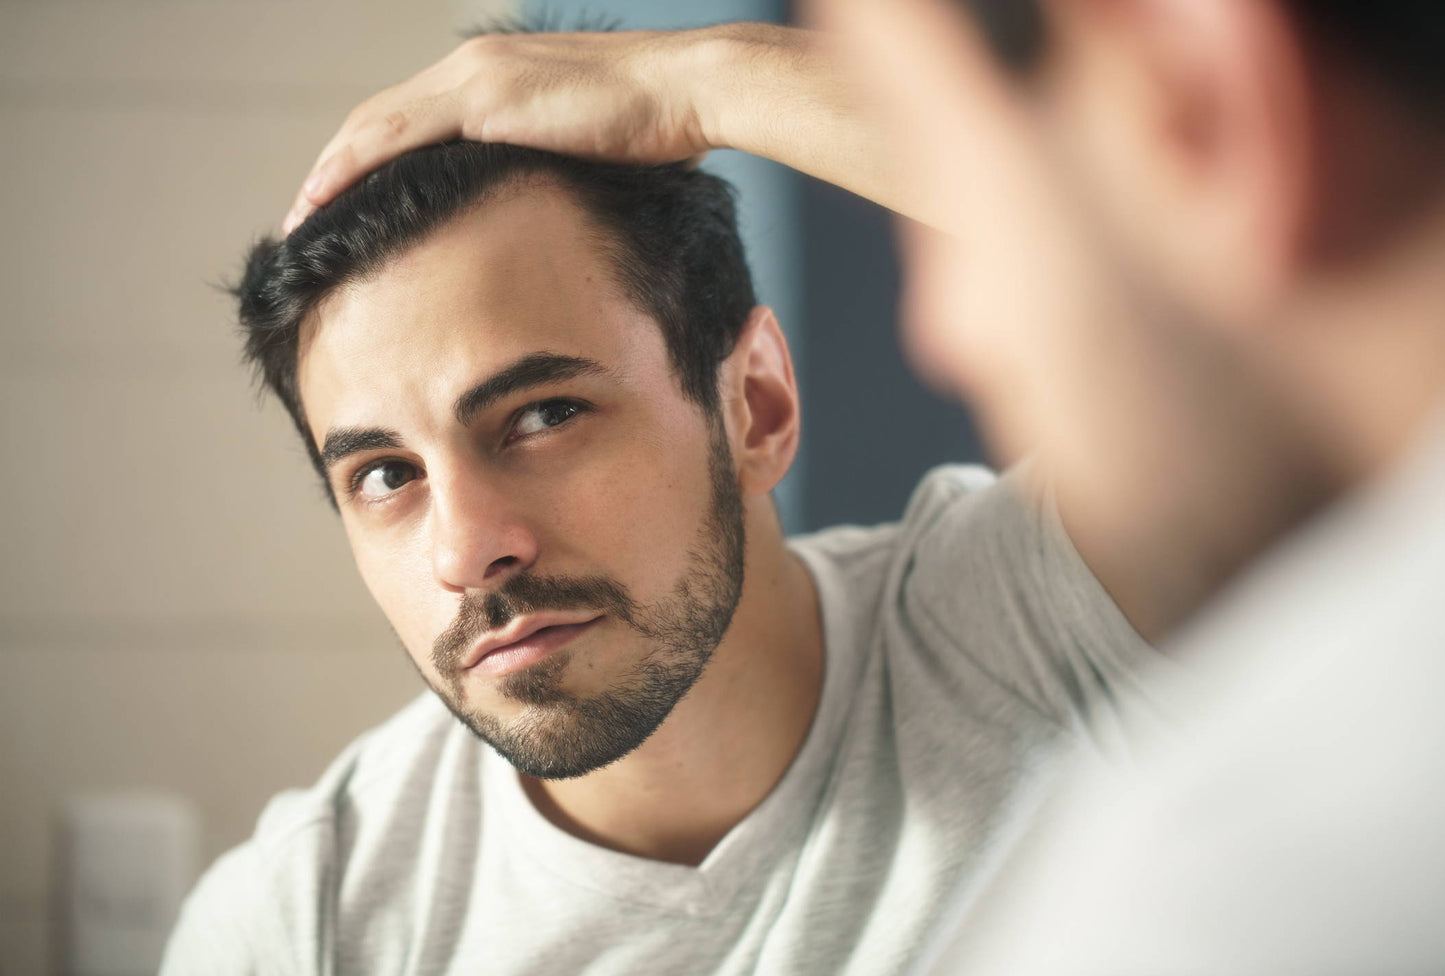 How Often Should You Trim Your Hair To Make It Healthier and Stronger?